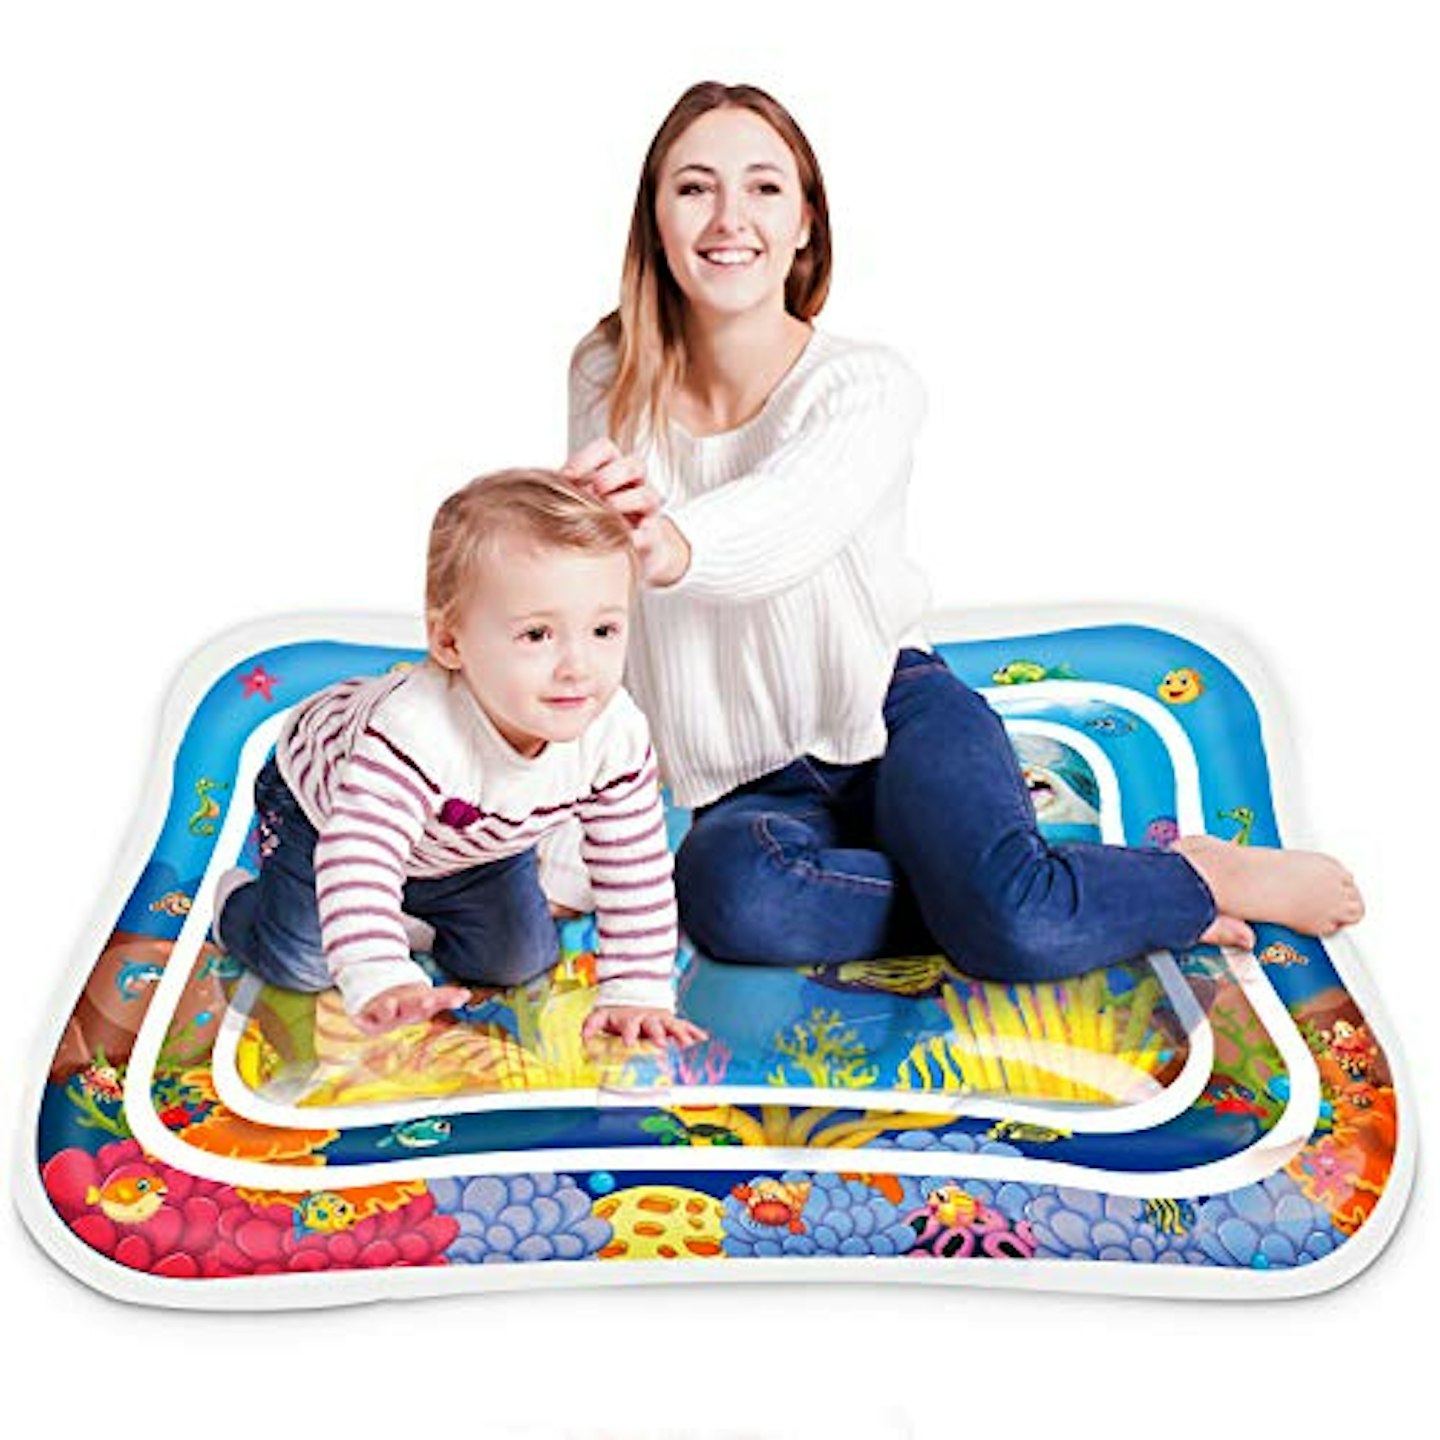 Keten Inflatable Tummy Time Water Play Mat